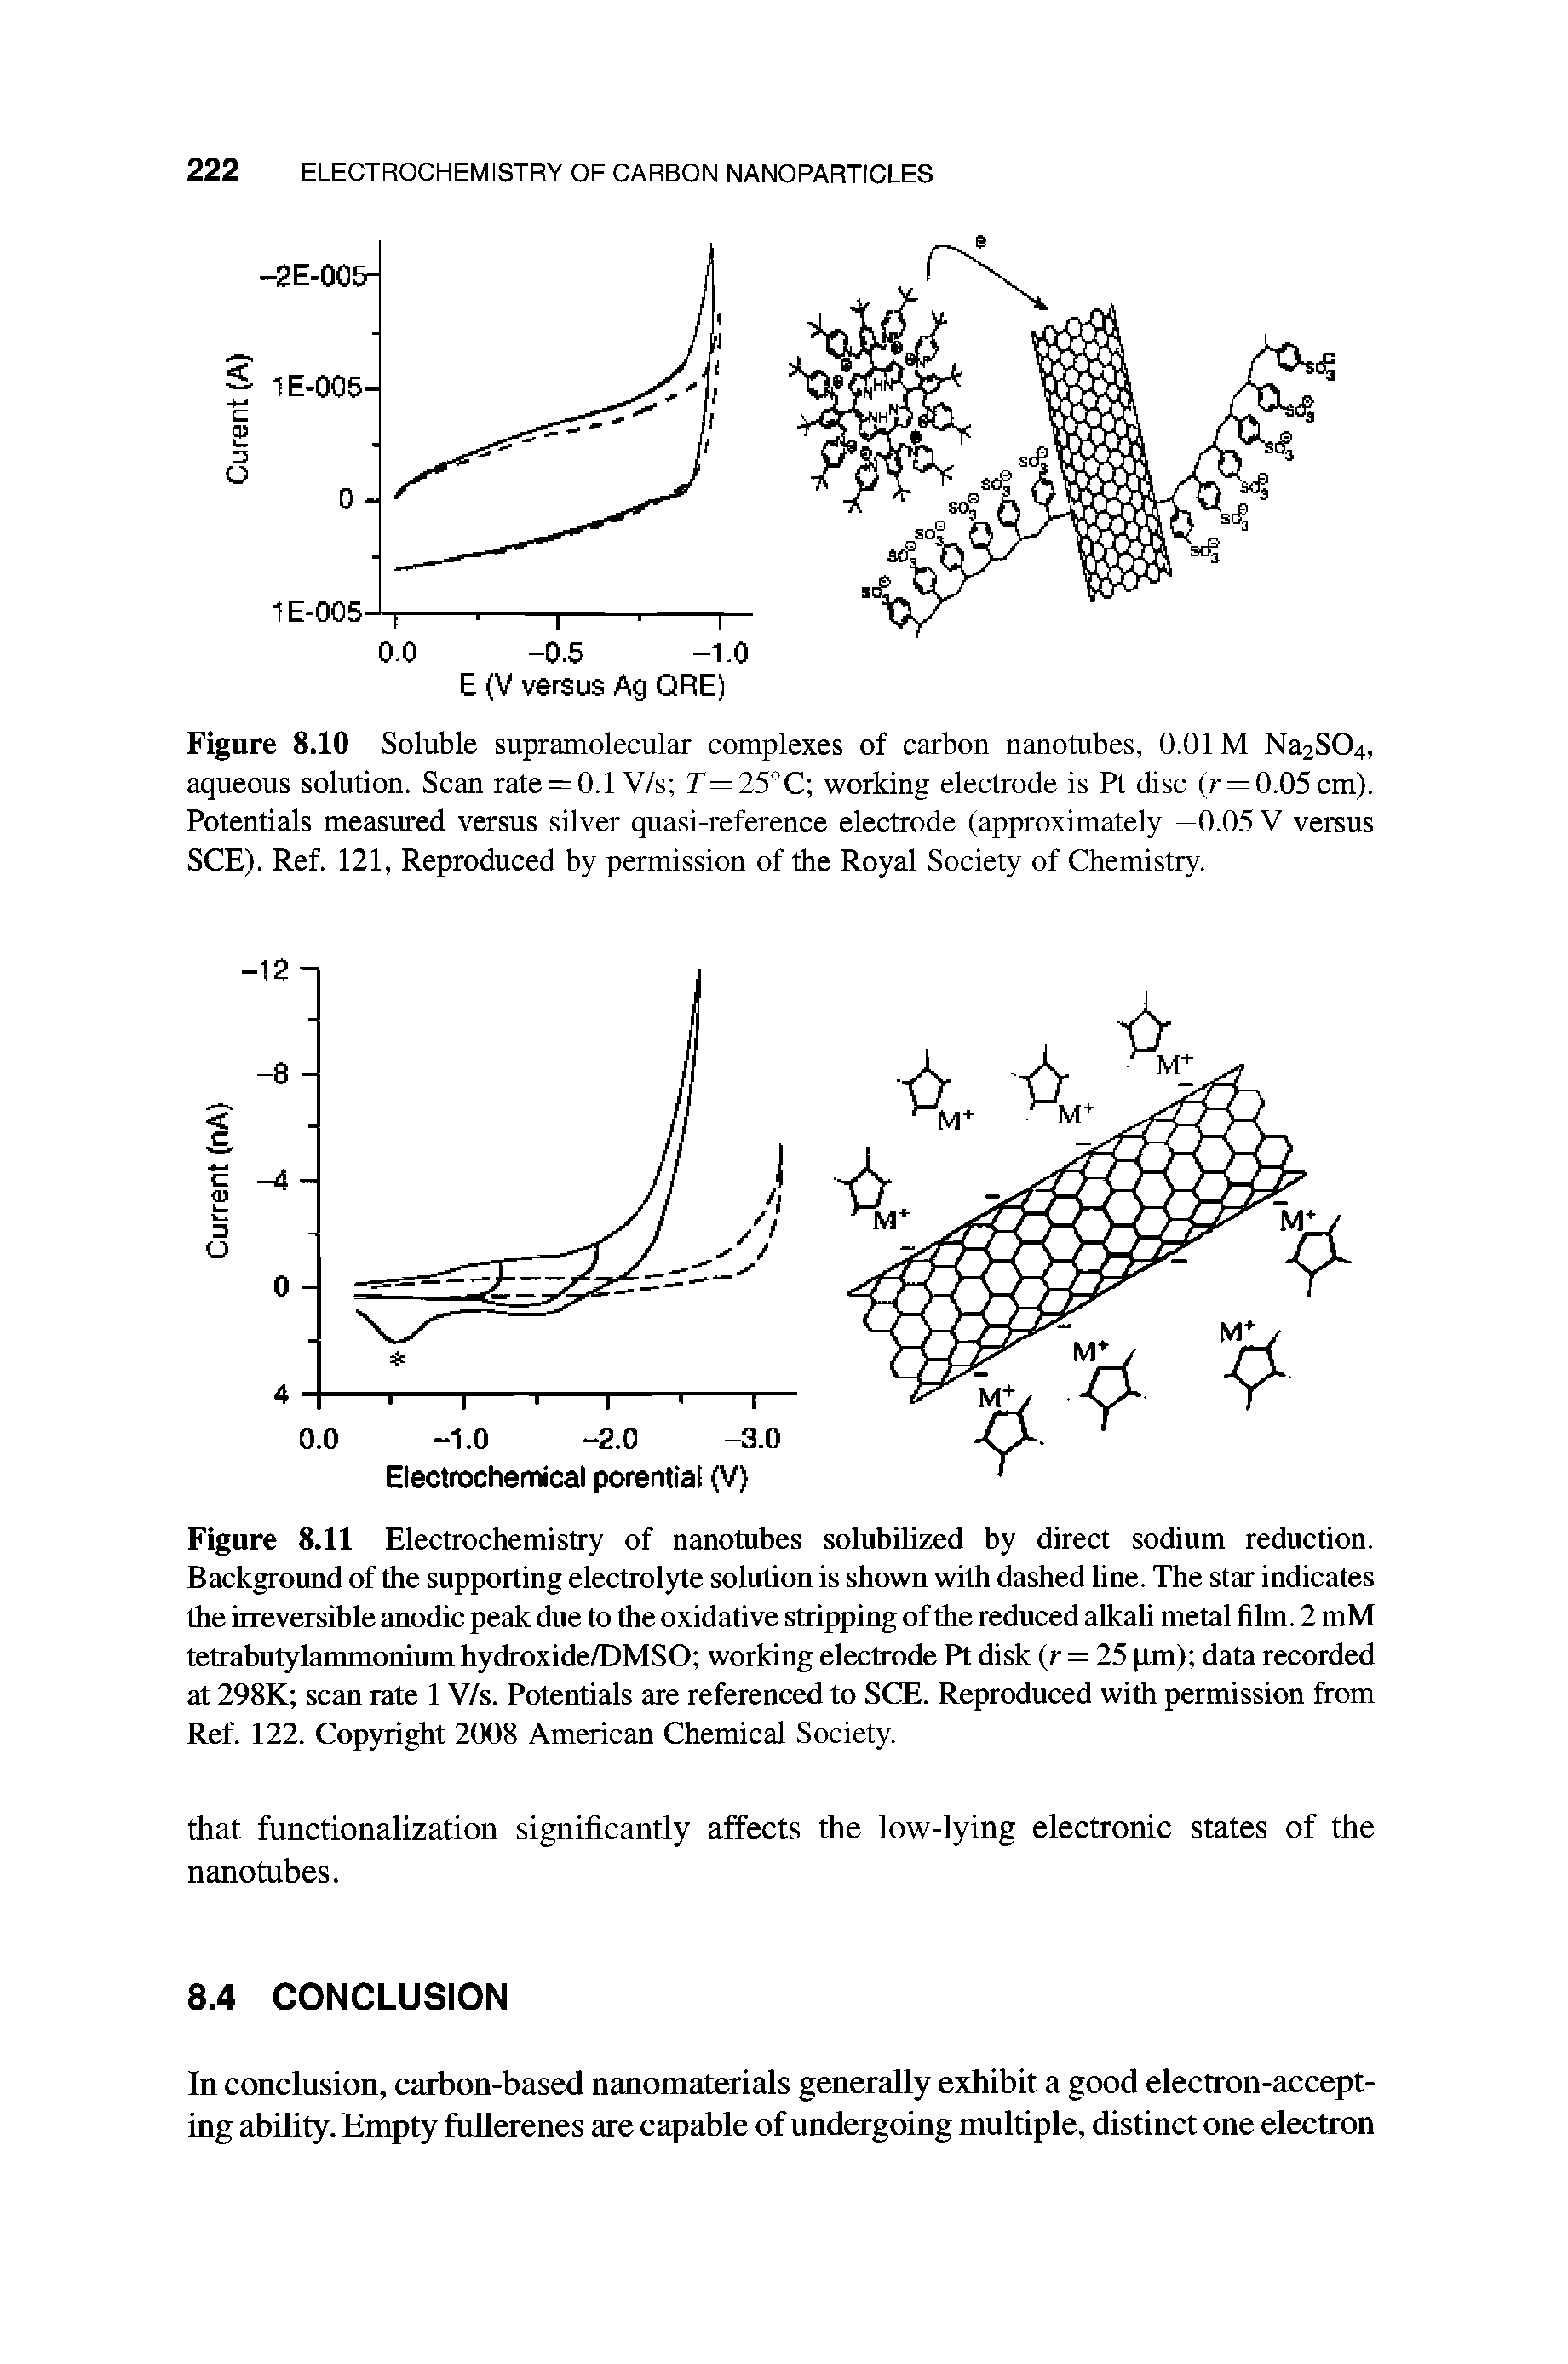 Figure 8.11 Electrochemistry of nanotubes solubilized by direct sodium reduction. Background of the supporting electrolyte solution is shown with dashed line. The star indicates the irreversible anodic peak due to the oxidative stripping of the reduced alkali metal film. 2 mM tetrabutylammonium hydroxide/DMSO working electrode Pt disk (r = 25 pm) data recorded at 298K scan rate 1 V/s. Potentials are referenced to SCE. Reproduced with permission from Ref. 122. Copyright 2008 American Chemical Society.